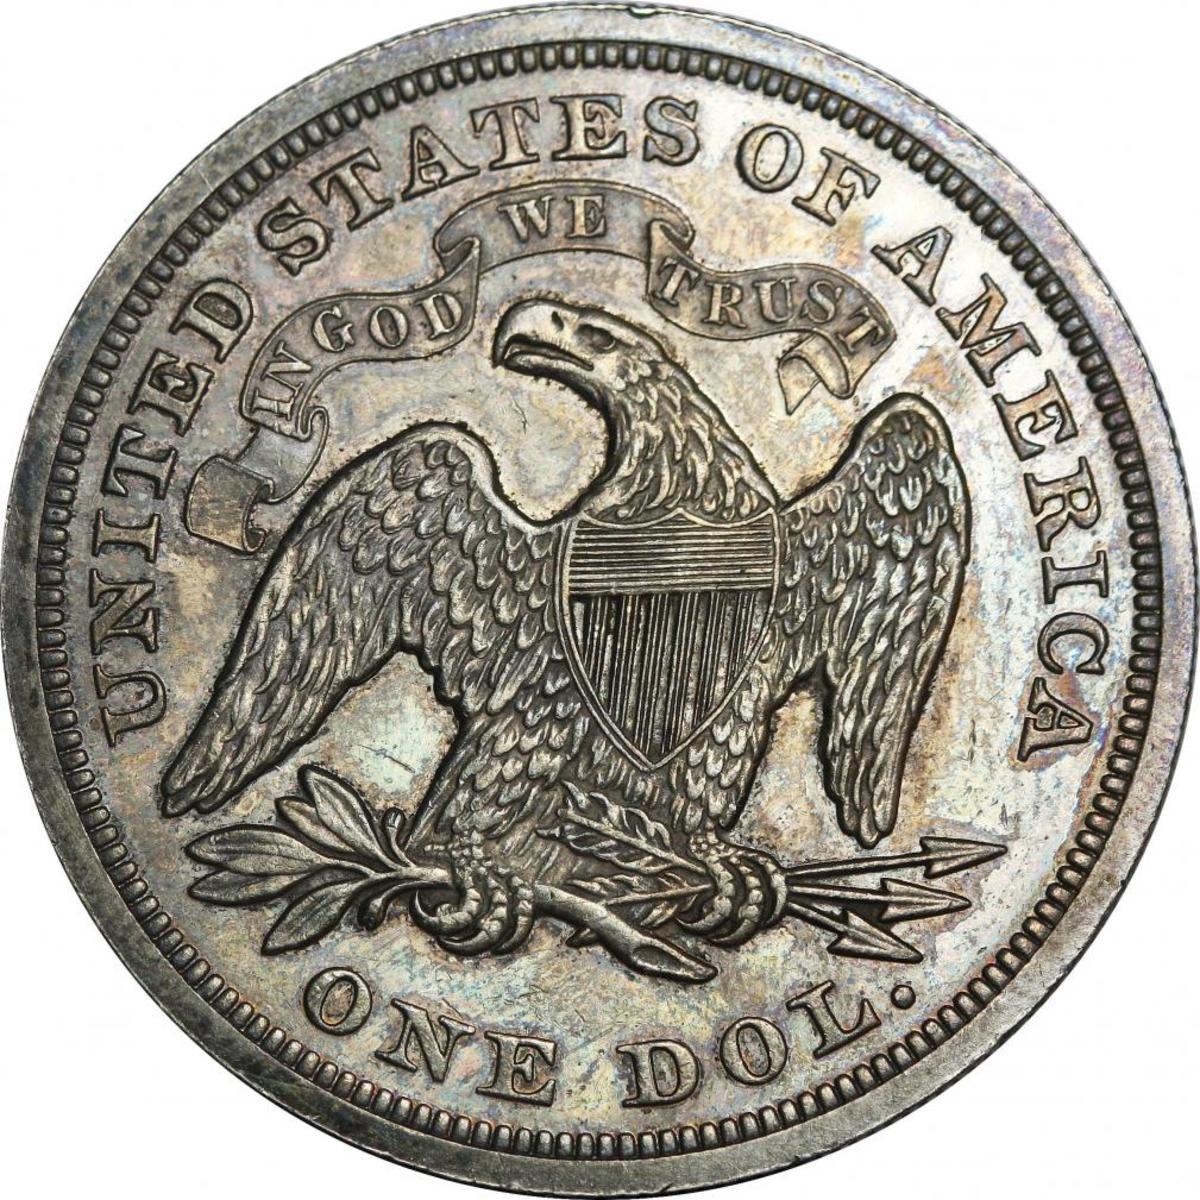 The Silver Dollar - Big Player In The American Wild West